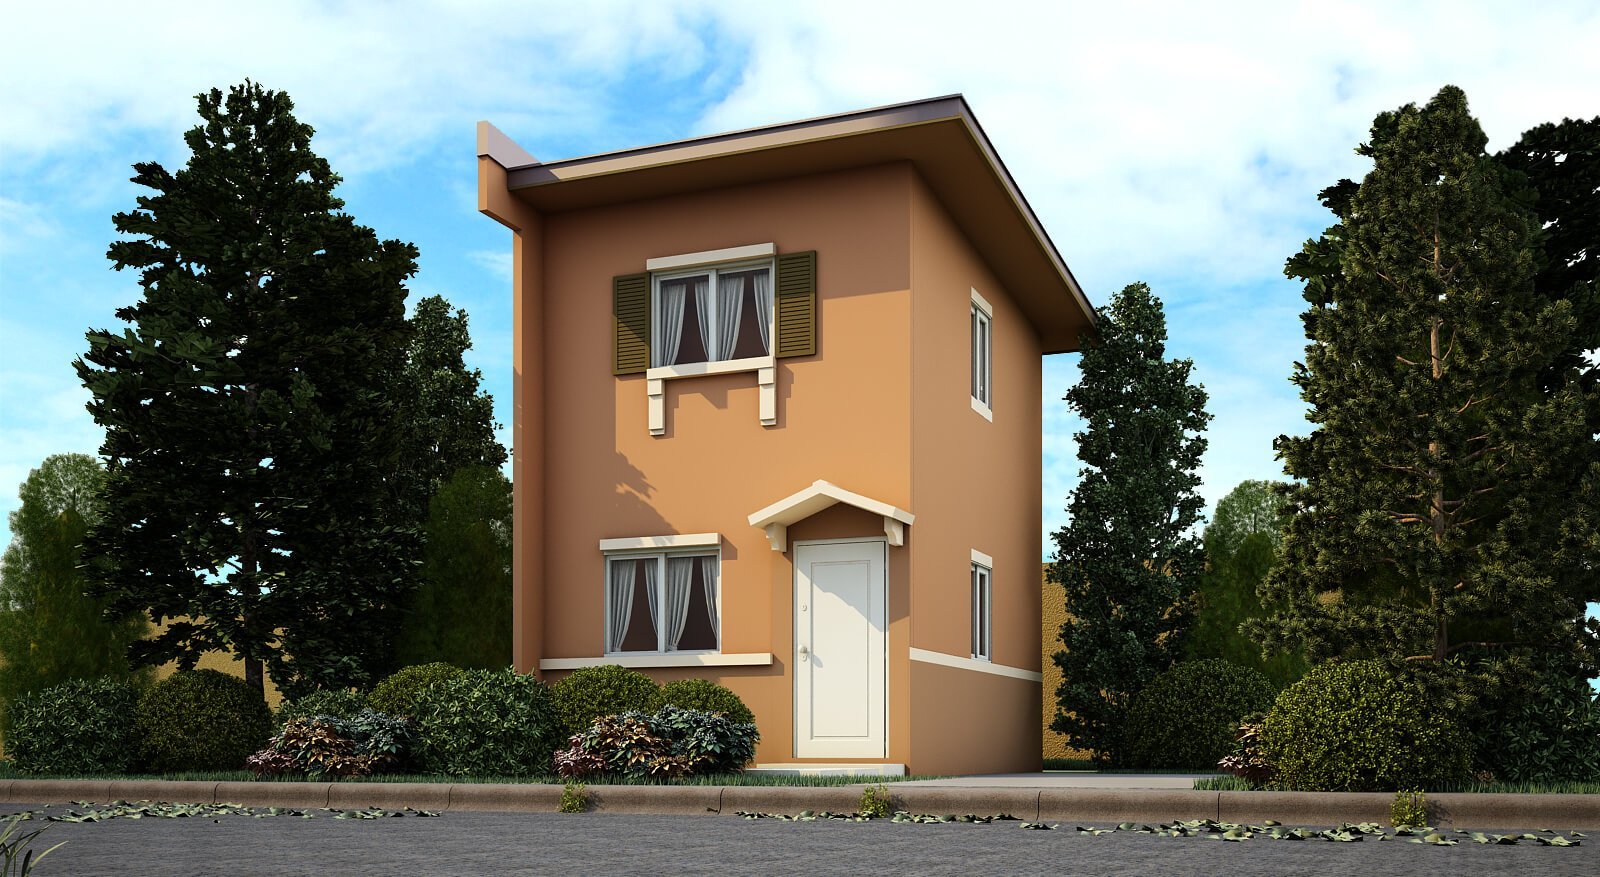 Ezabelle-96sqm-Affordable House and Lot for Sale in Tarlac